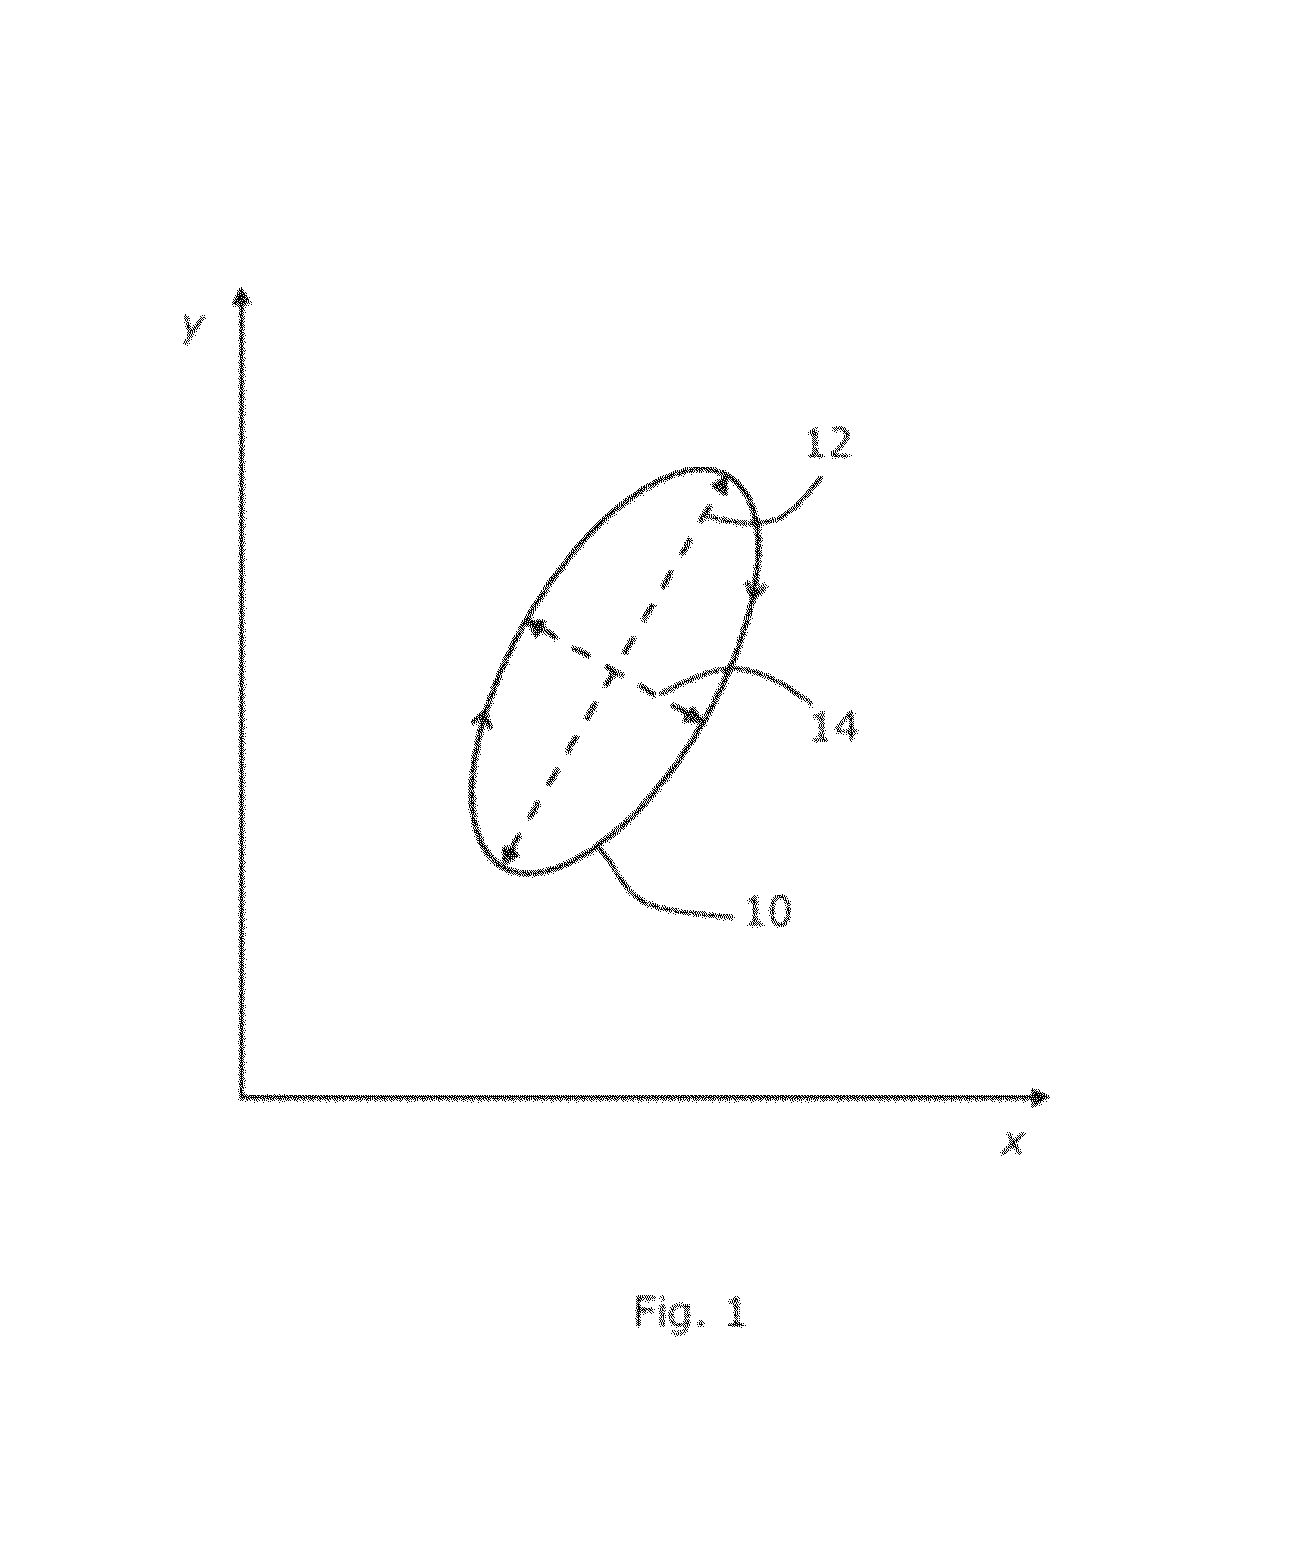 Radiotherapy apparatus configured to track a motion of a target region using a combination of a multileaf collimator and a patient support